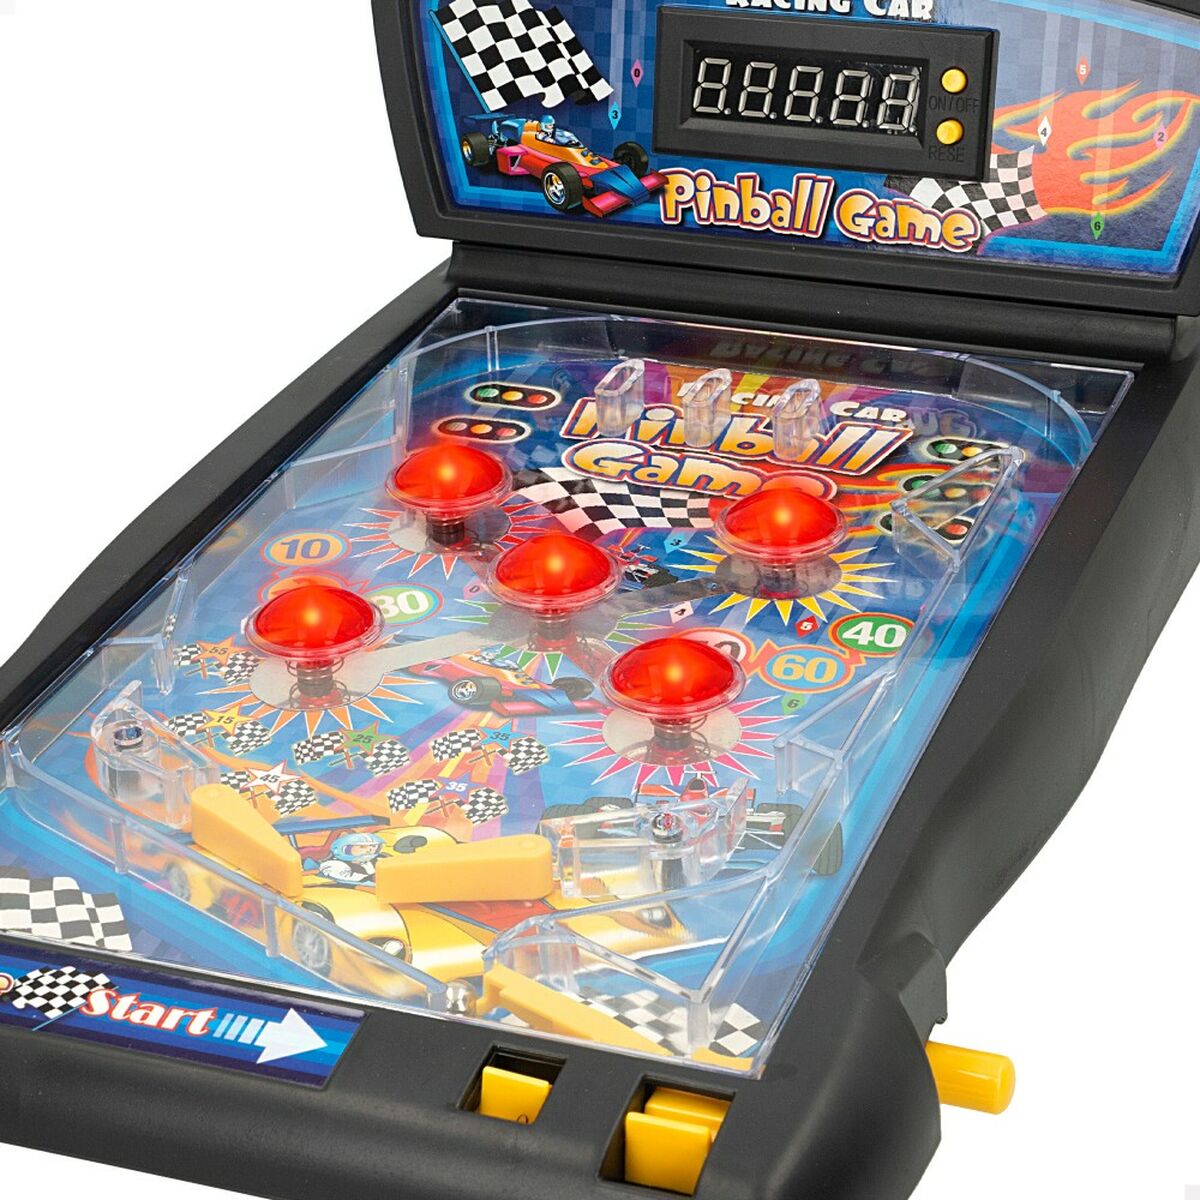 Board game Colorbaby Pinball (2 Units)